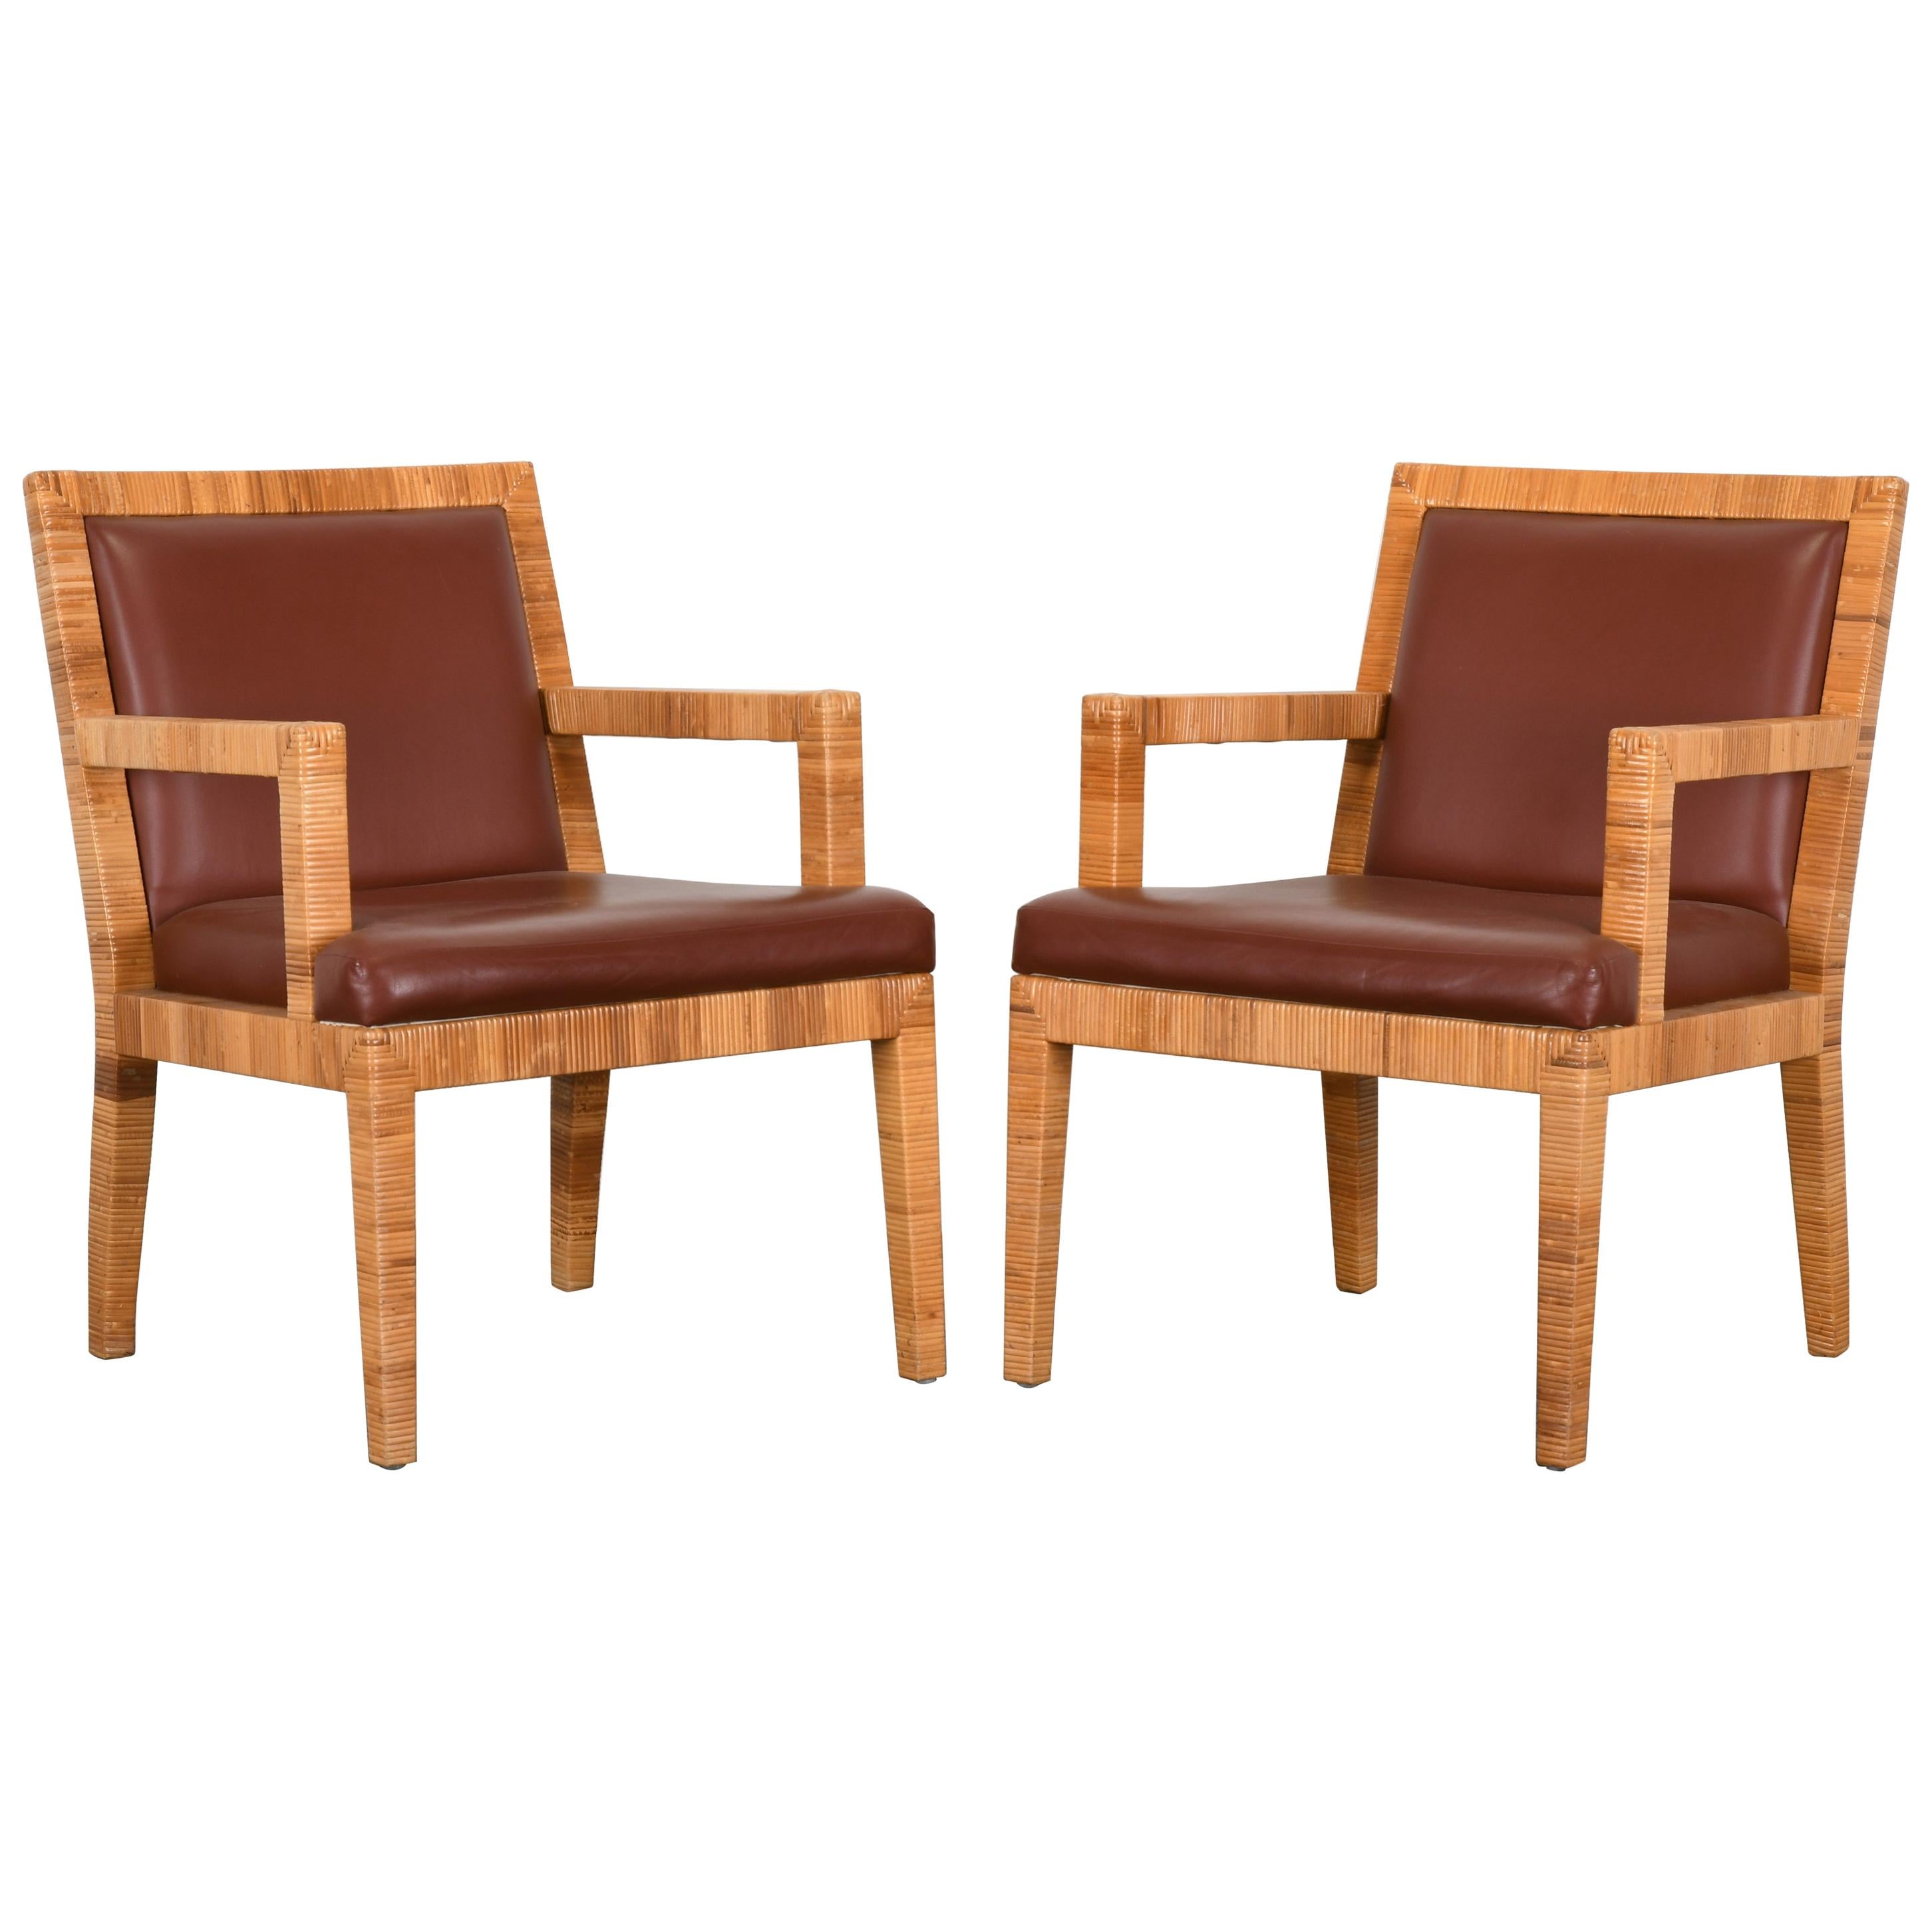 Pair of Rattan and Leather Armchairs by Bielecky Brothers, 1980s